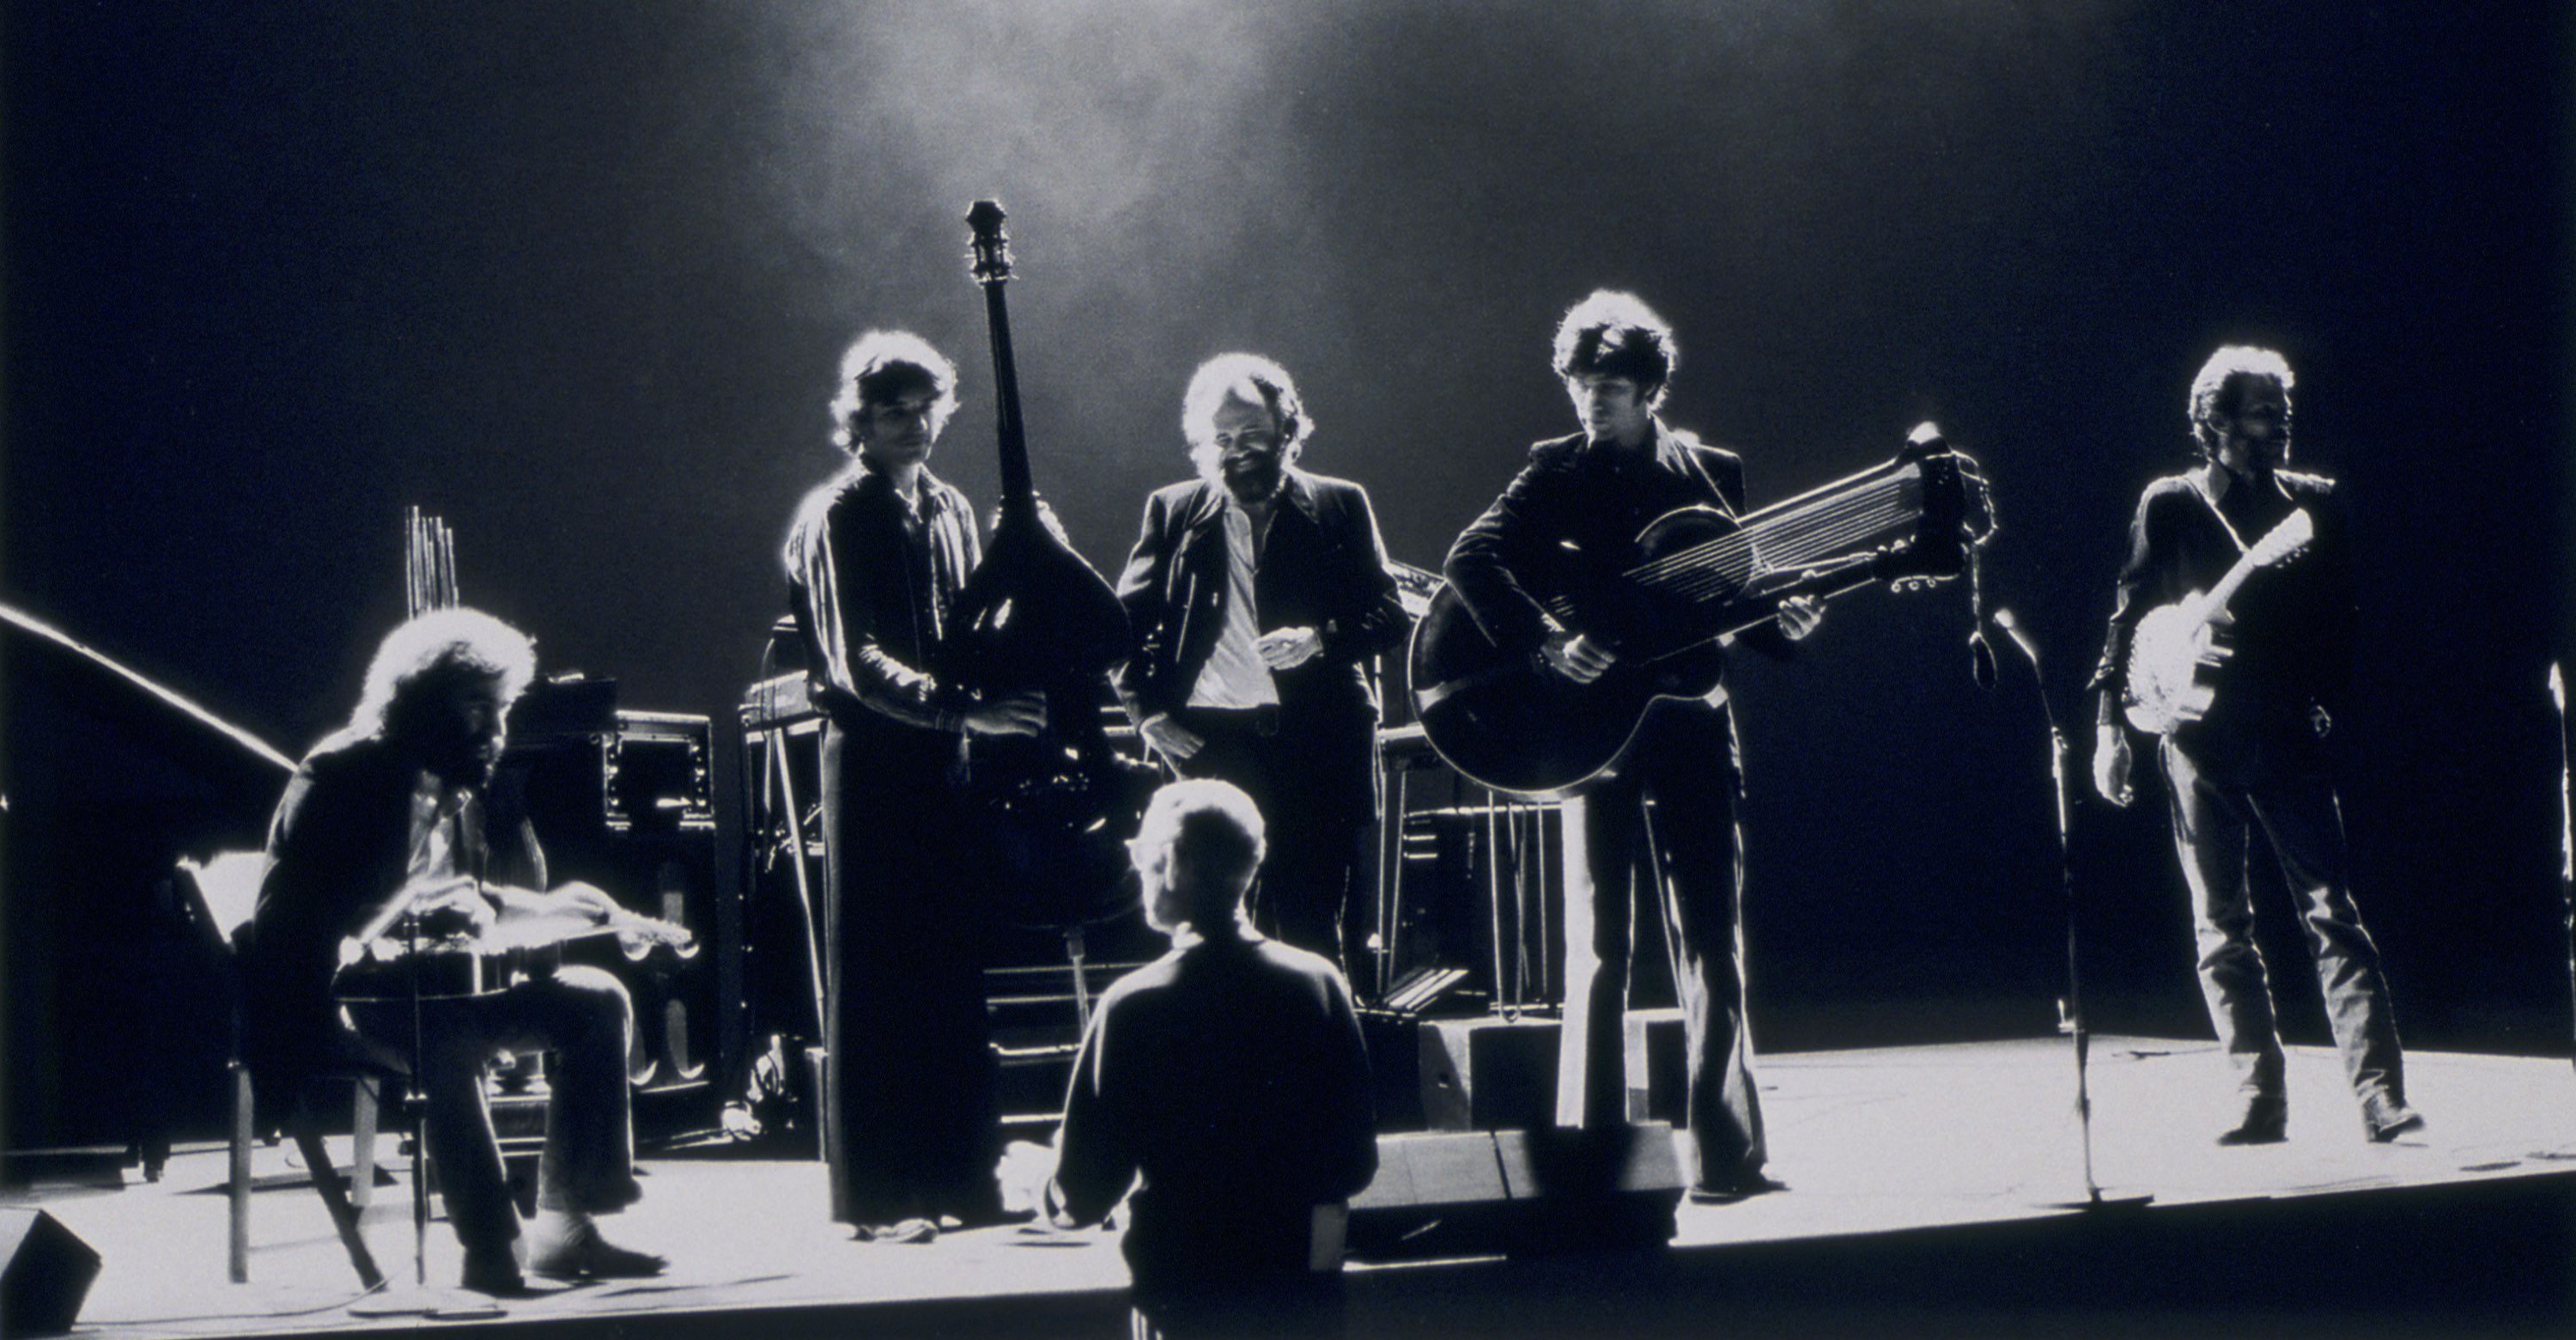 From the Archive: The Last Waltz